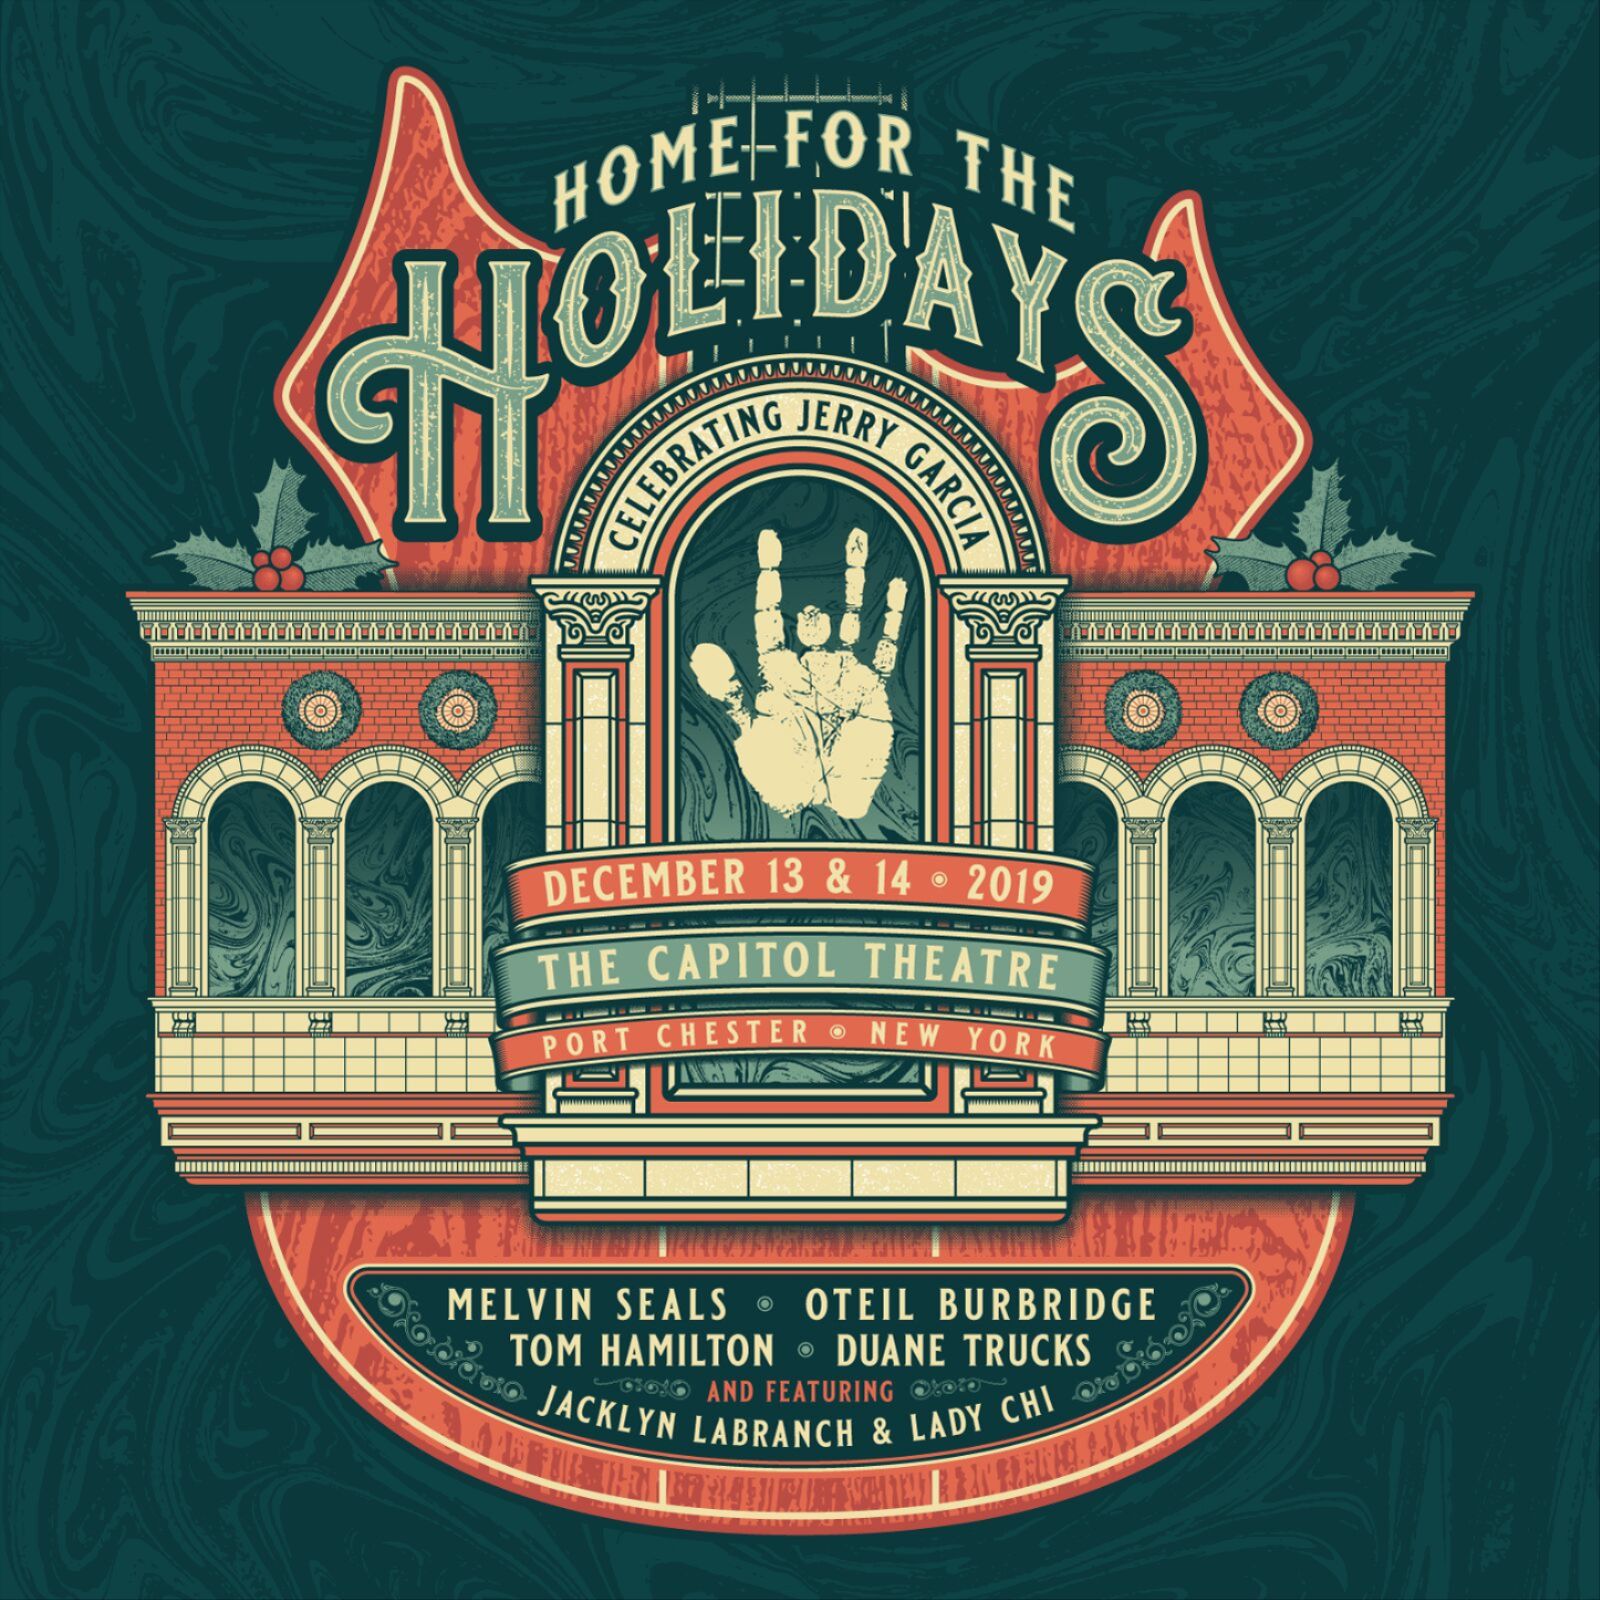 Home for the Holidays Celebrating Jerry Garcia | The Capitol Theatre